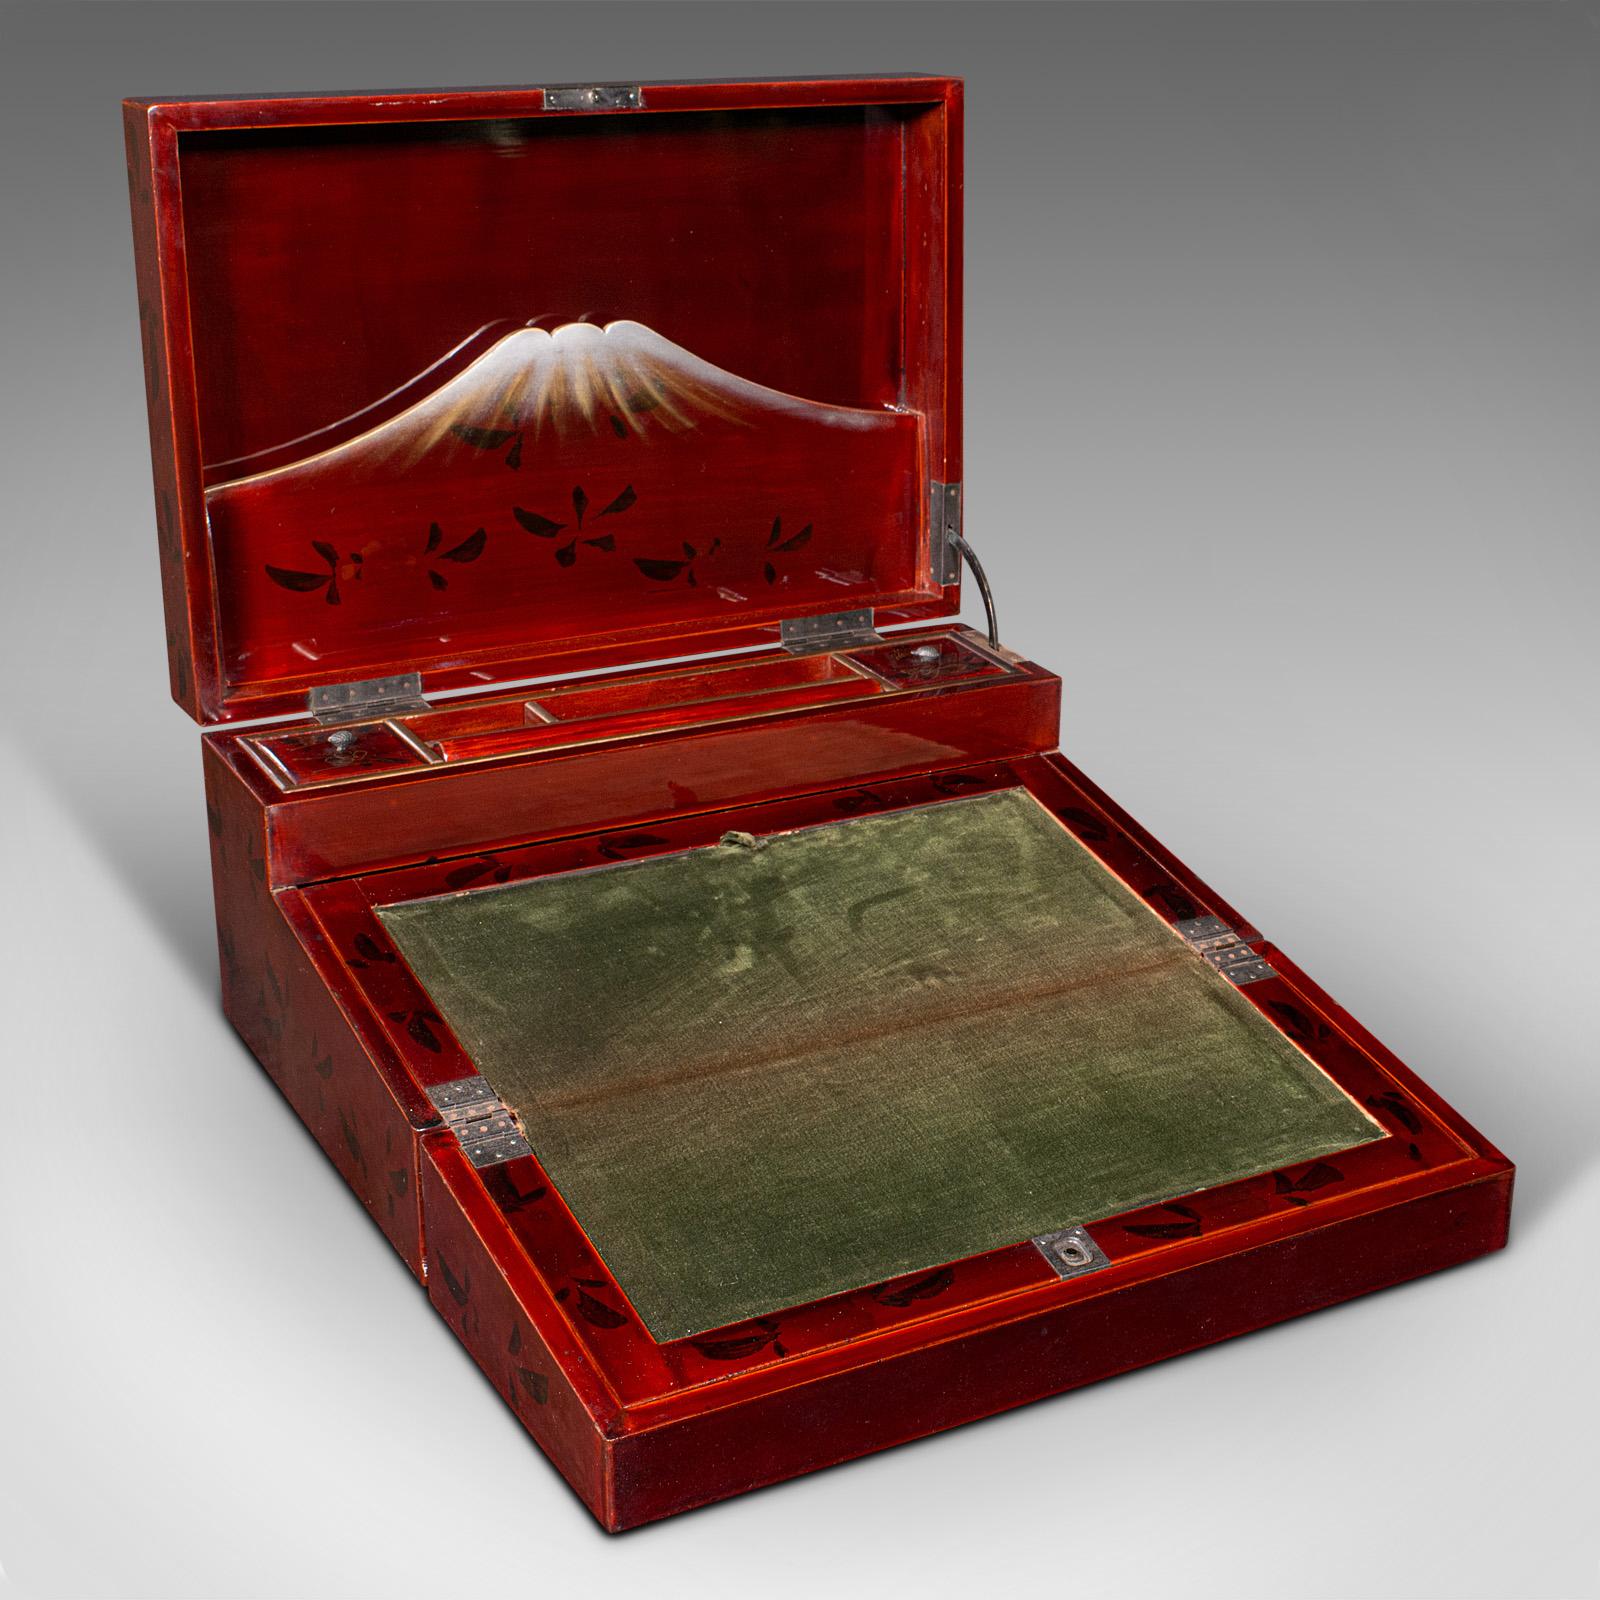 This is a vintage cleric's writing slope. A Japanese, red lacquer travelling correspondence box, dating to the Art Deco period, circa 1930.

Striking writing case with delightful Japanese iconography
Displays a desirable aged patina and in good